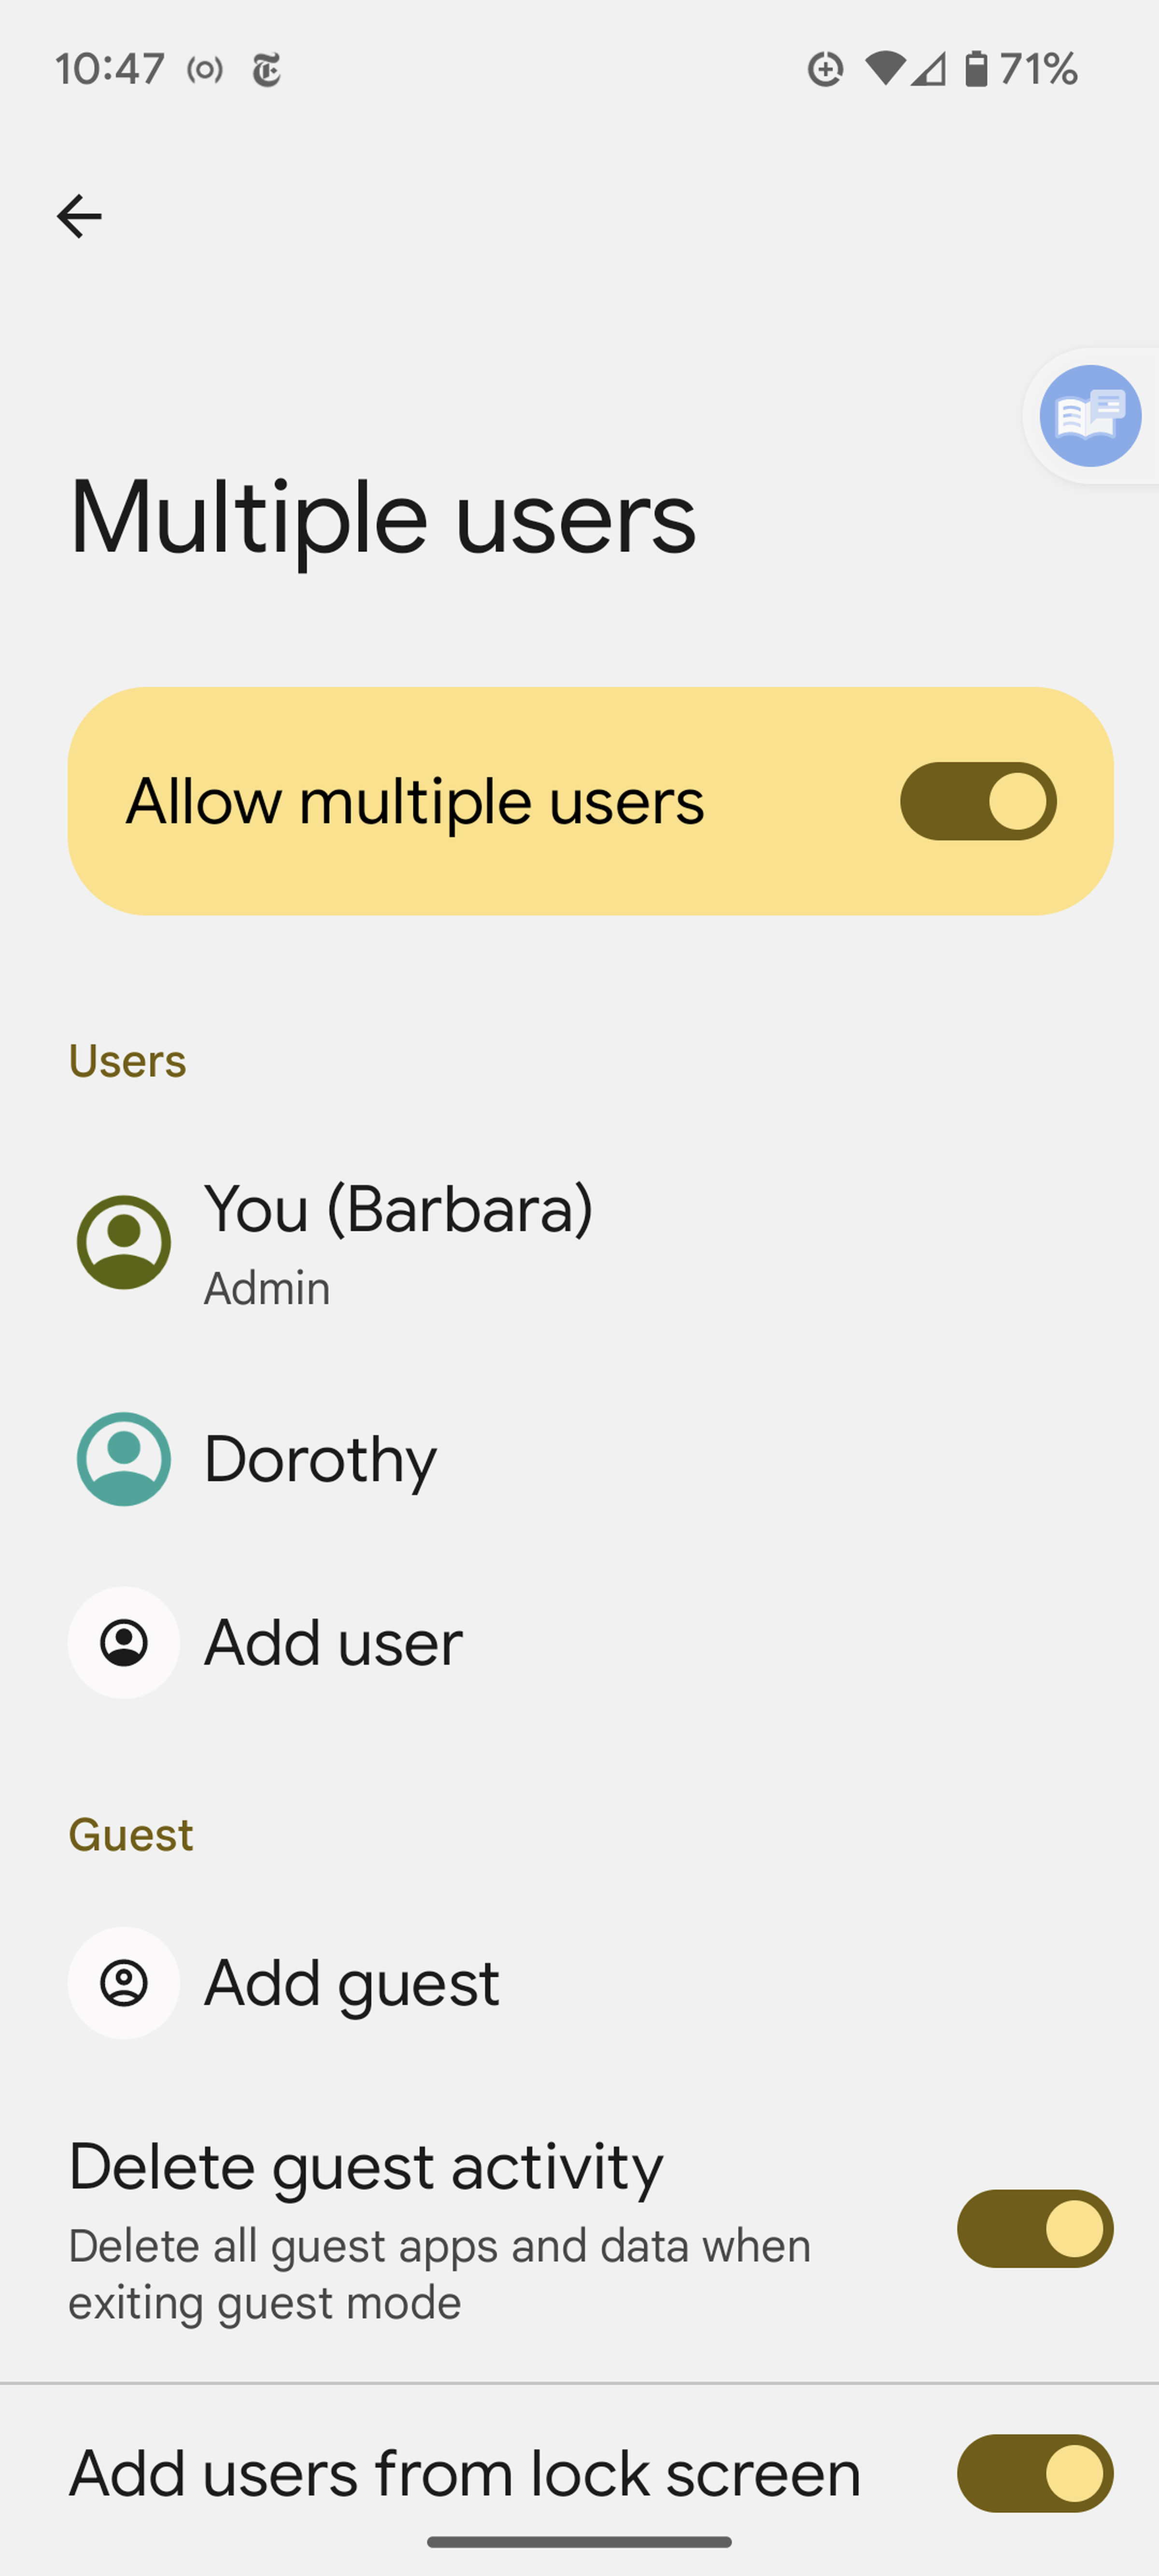 Screen headed Multiple users with Allow multlple users toggled on, below that under Users is listed You (Barbara), Dorothy, and Add user; below that is Guest and Add guest.